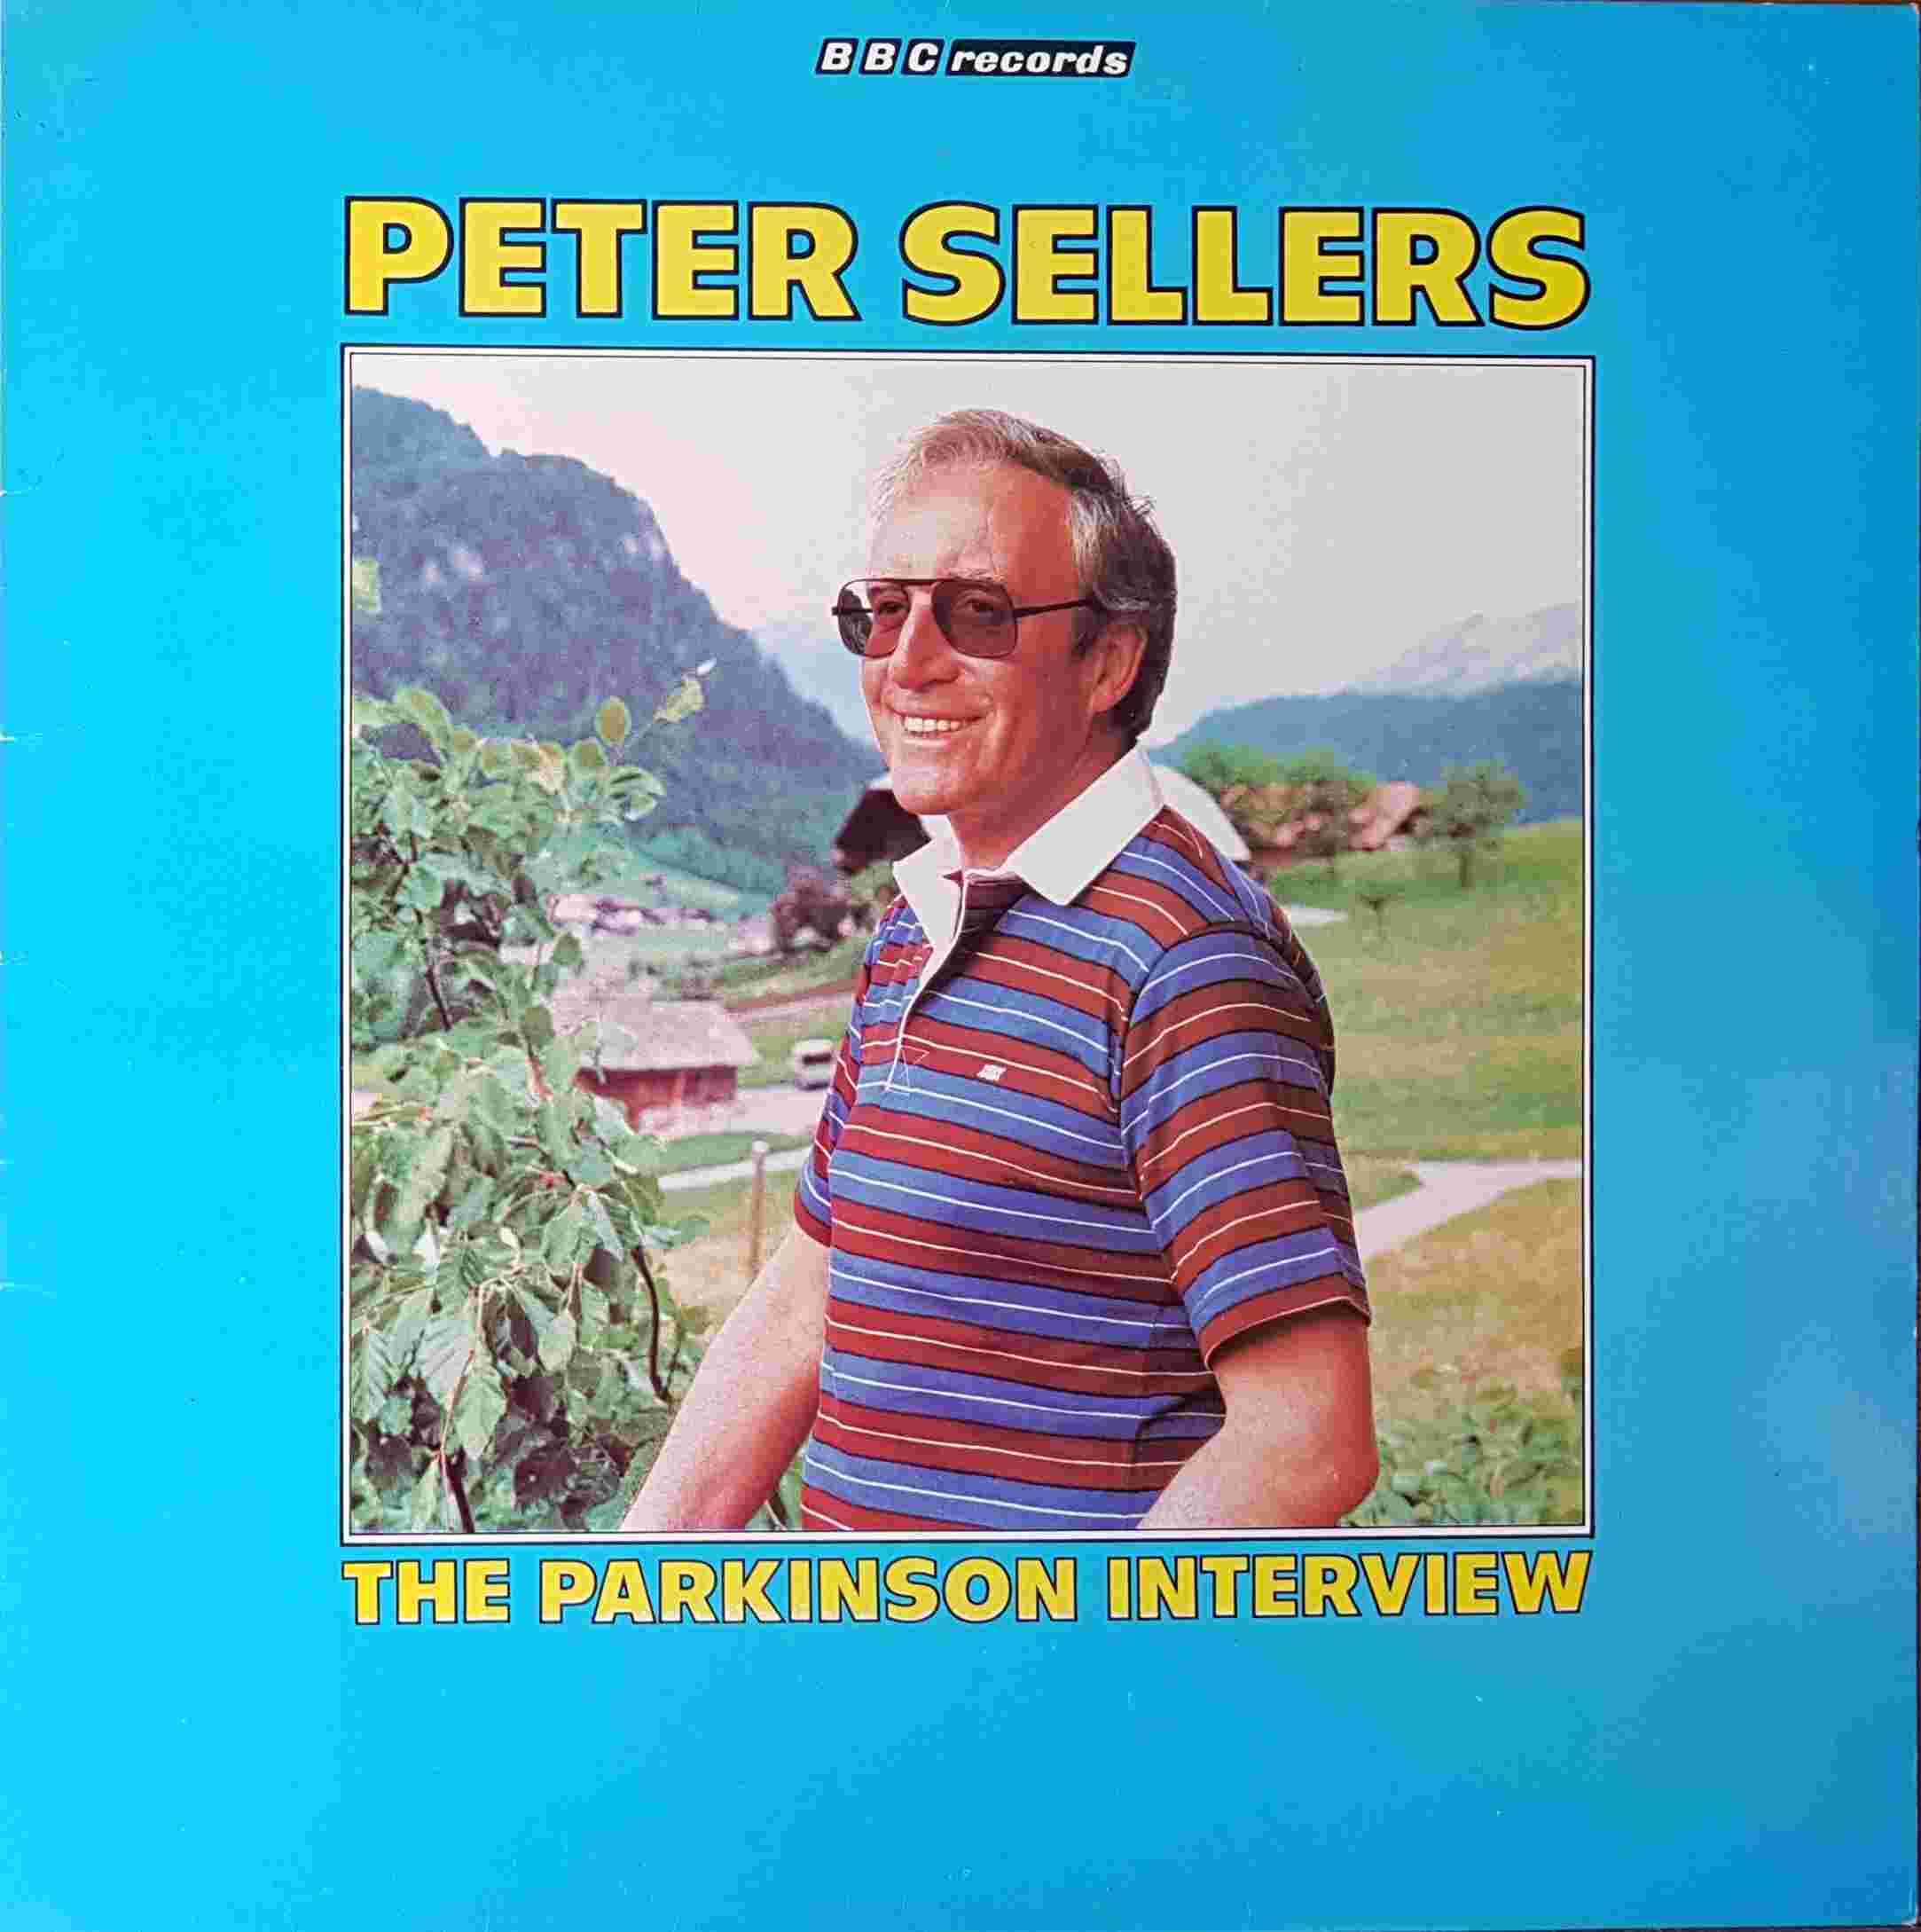 Picture of REH 402 Peter Sellers - The Parkinson interview by artist Peter Sellers / Michael Parkinson from the BBC albums - Records and Tapes library